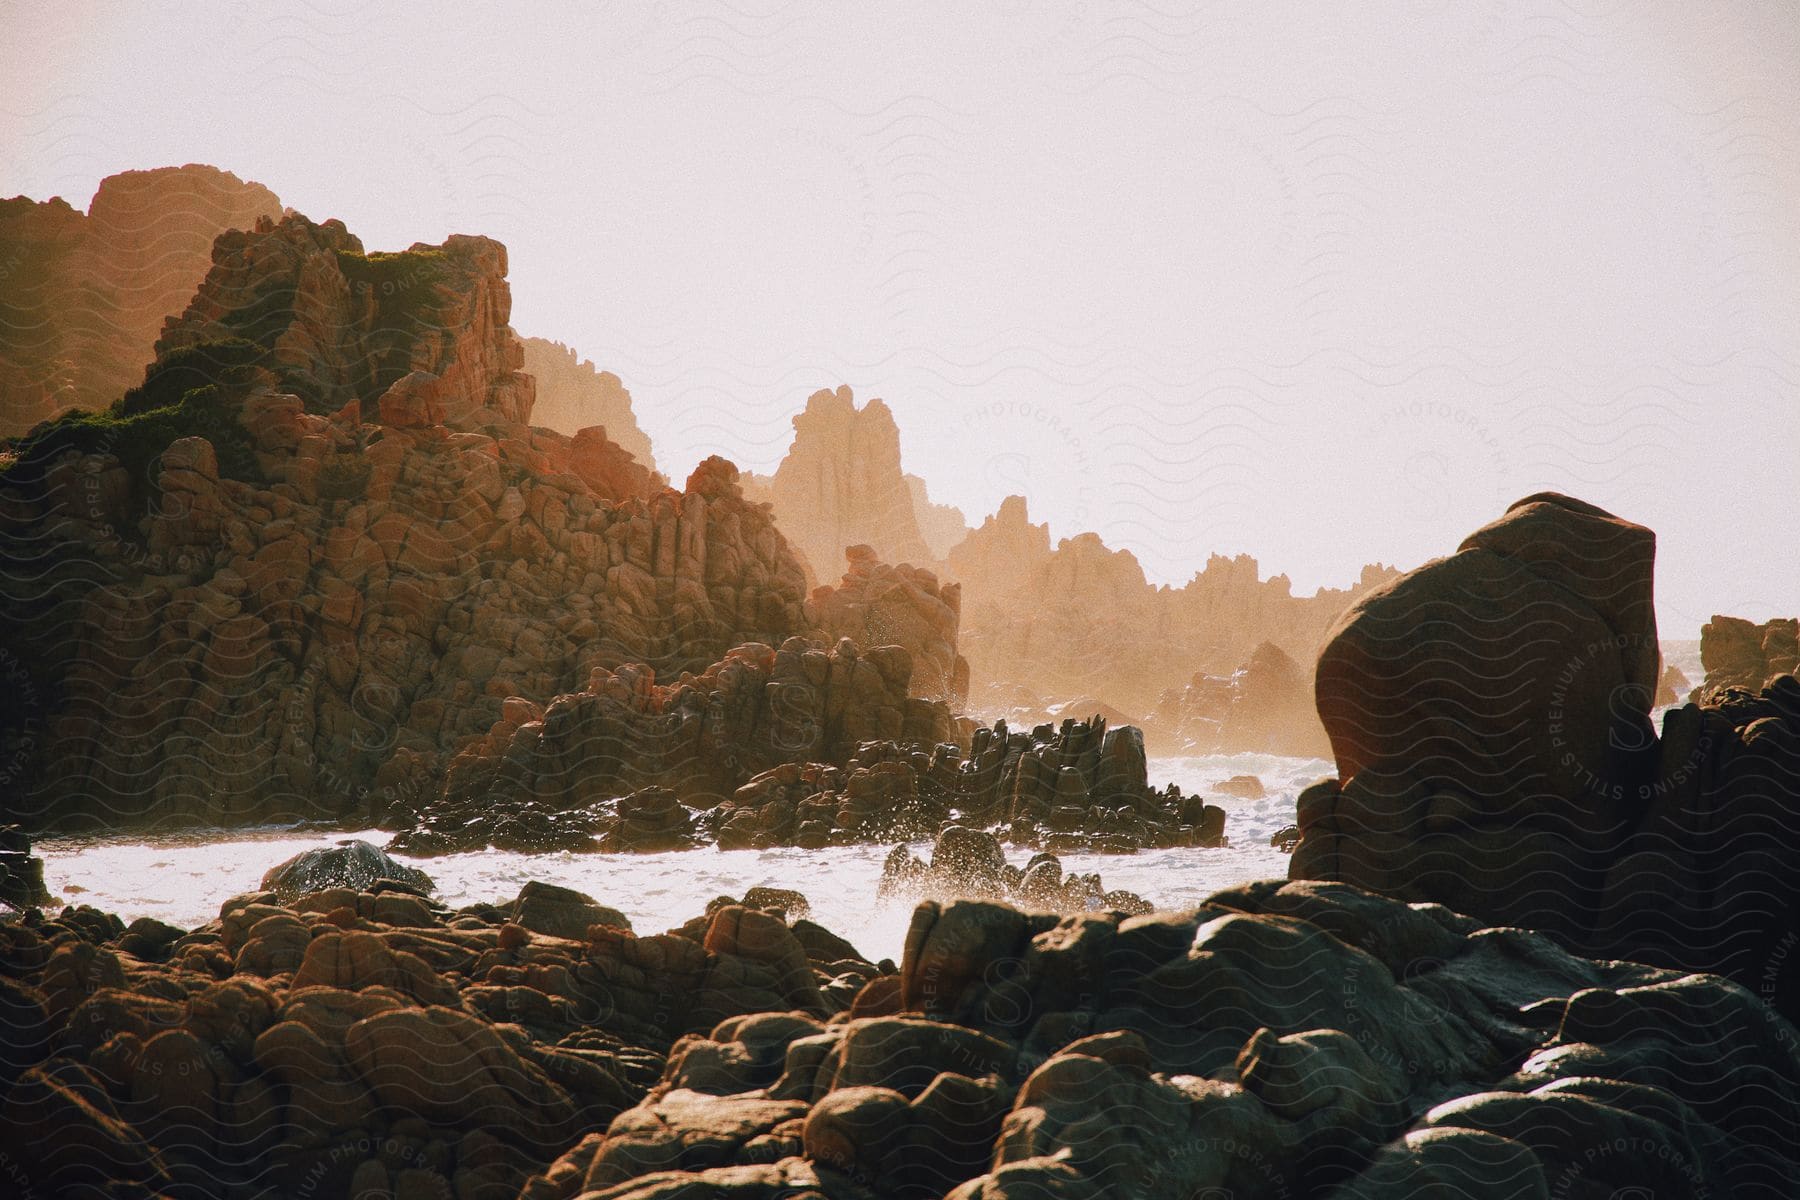 Ocean waves roll into a rocky coastline on a sunny day.